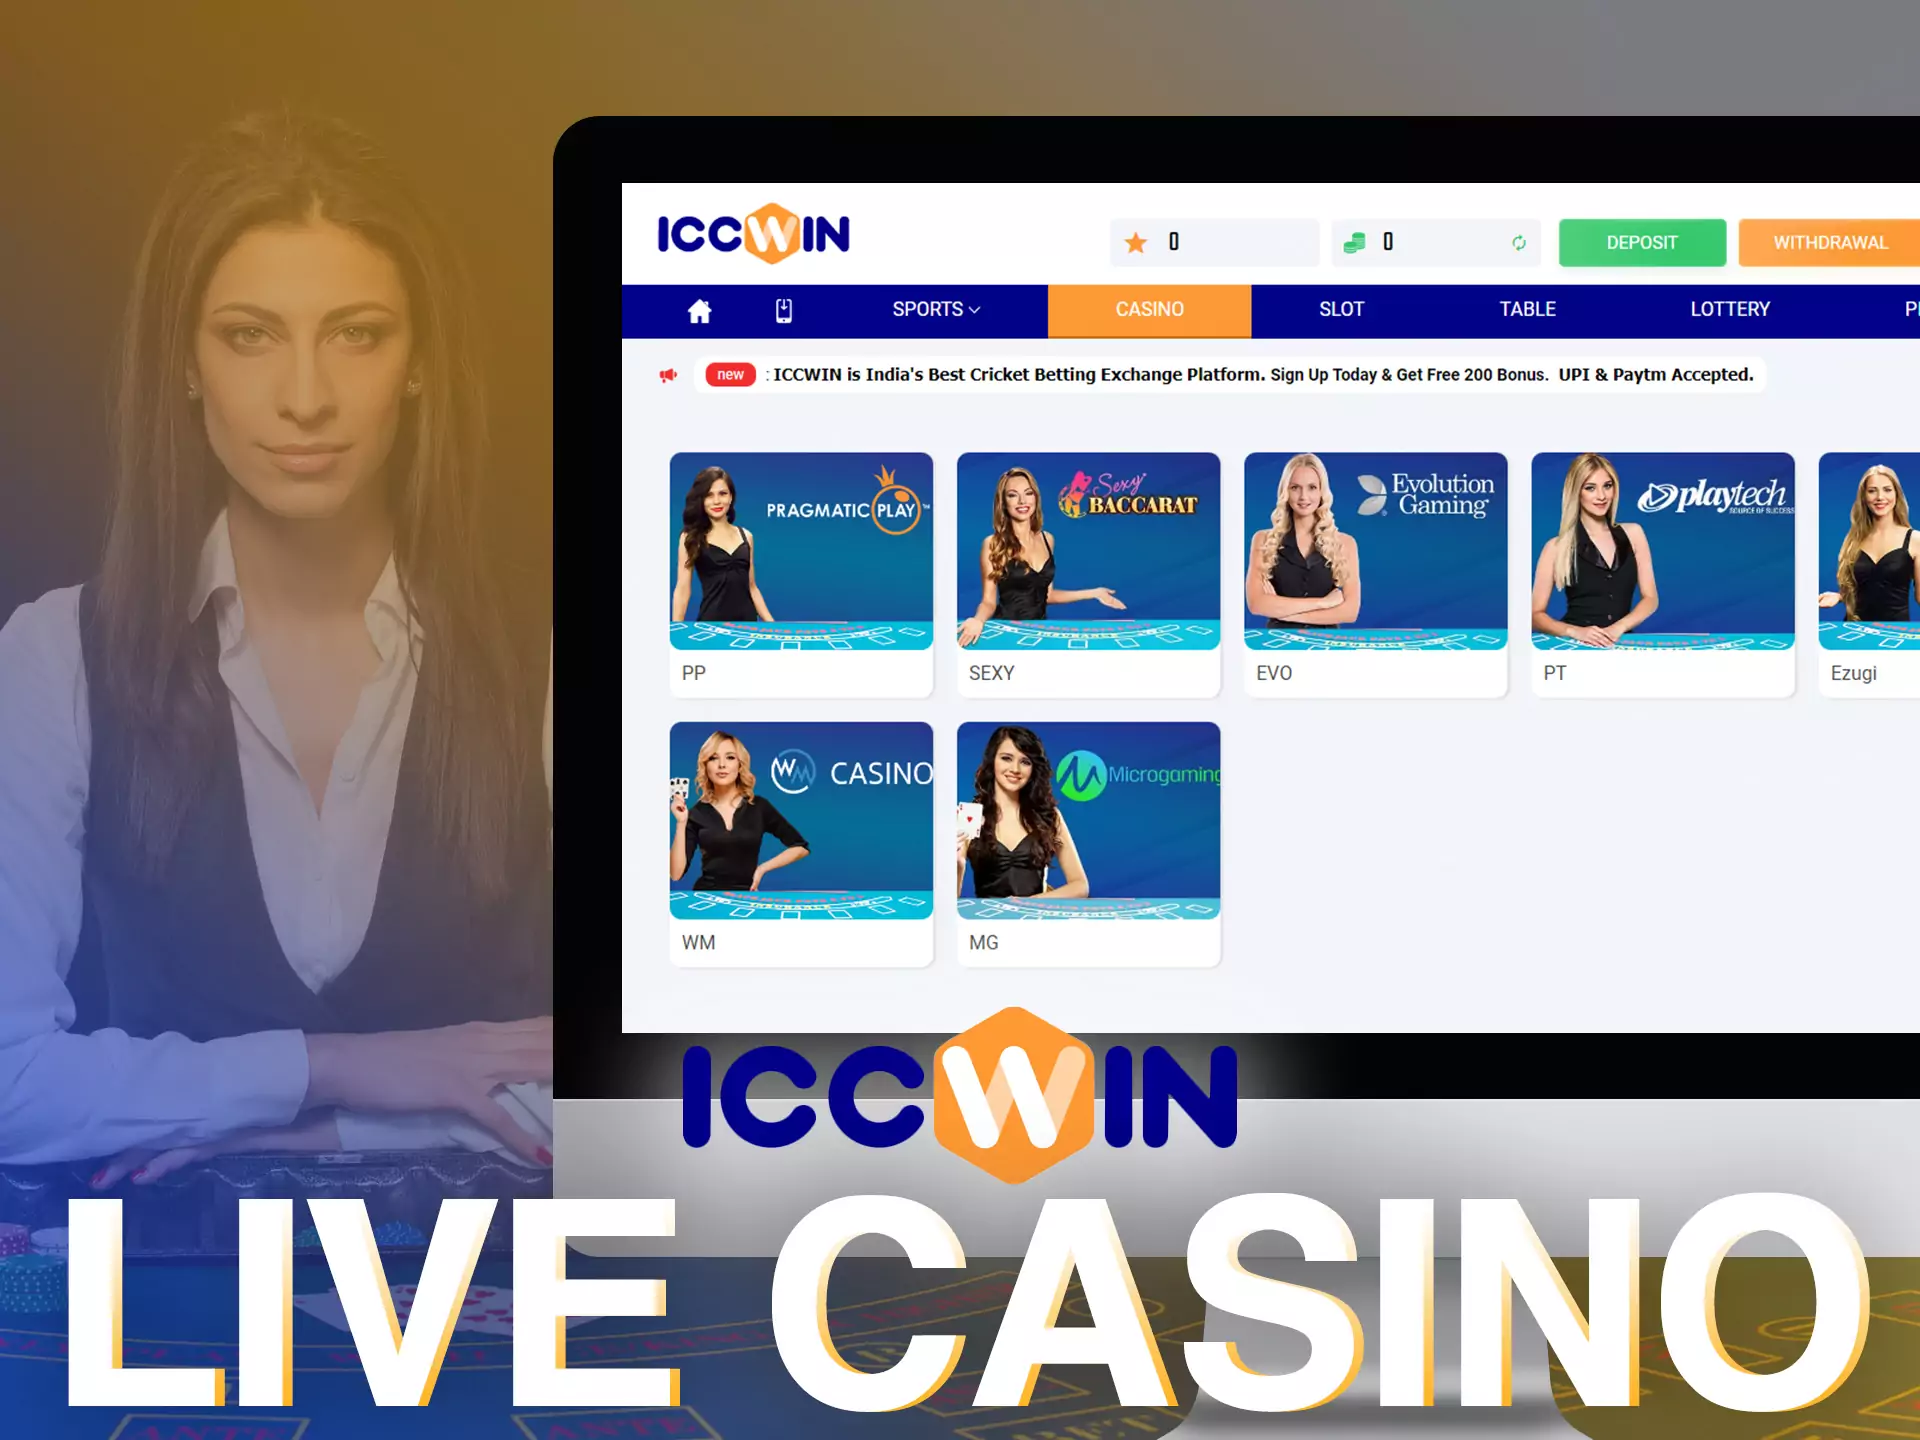 In the ICCWin casino, players meet real dealers.